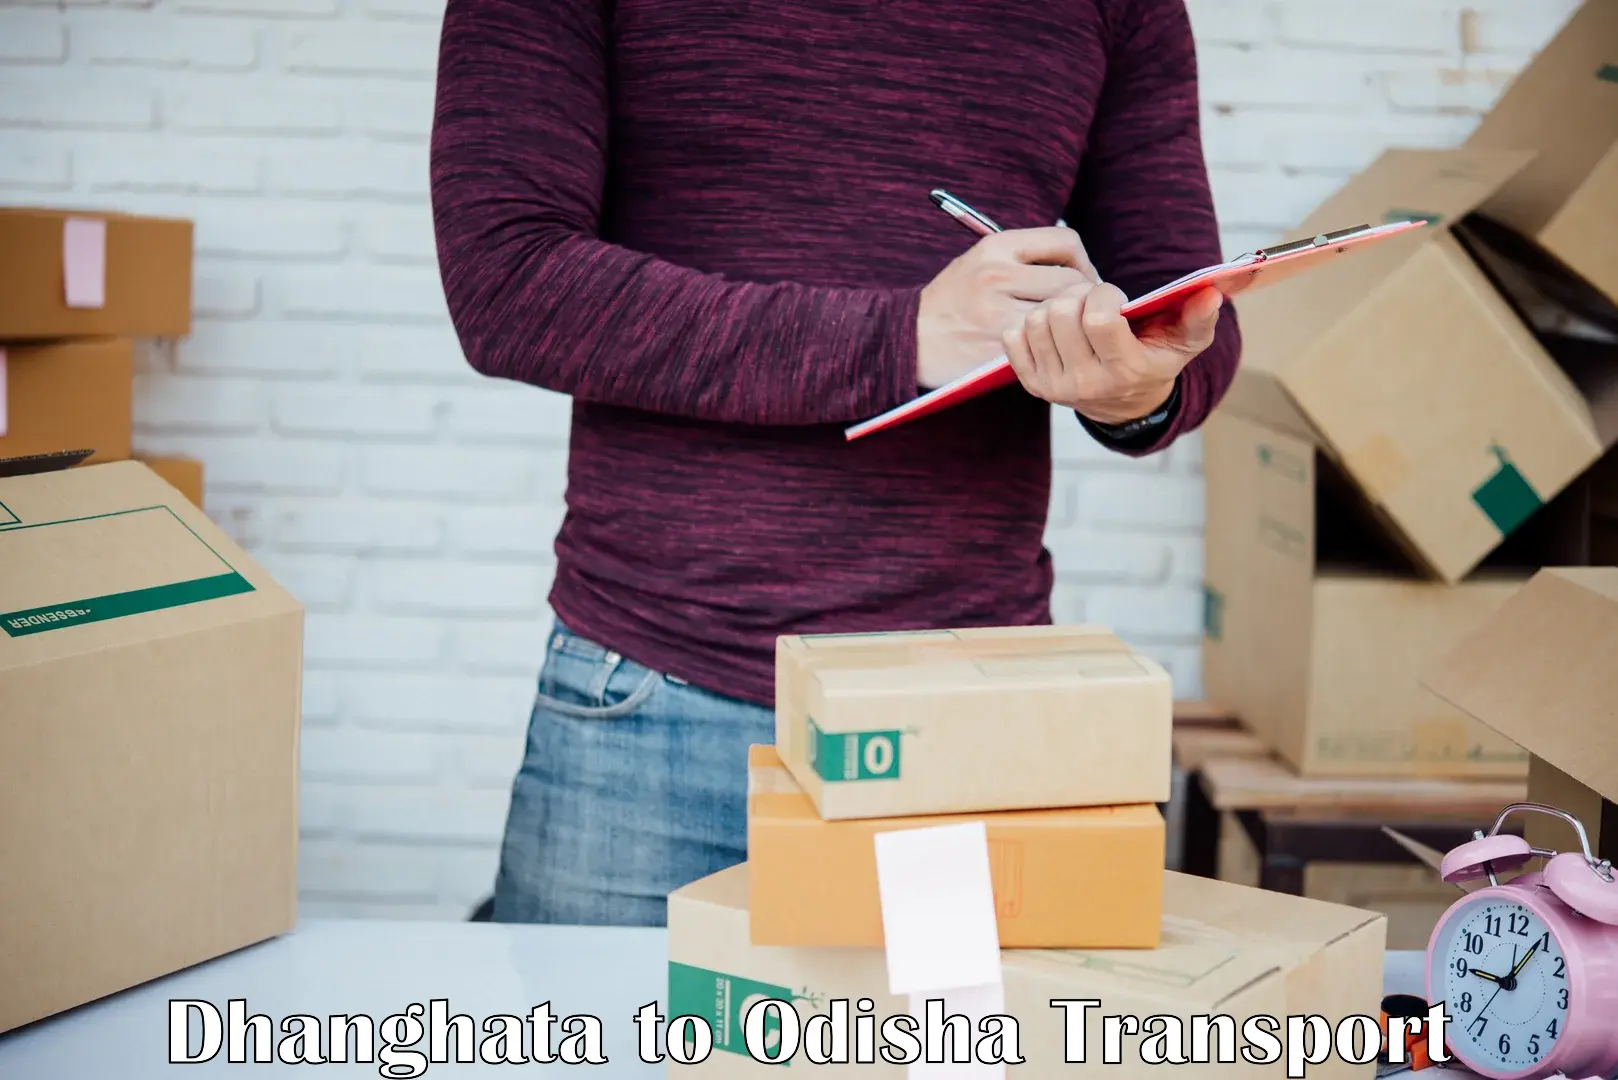 Cargo transport services Dhanghata to Jashipur